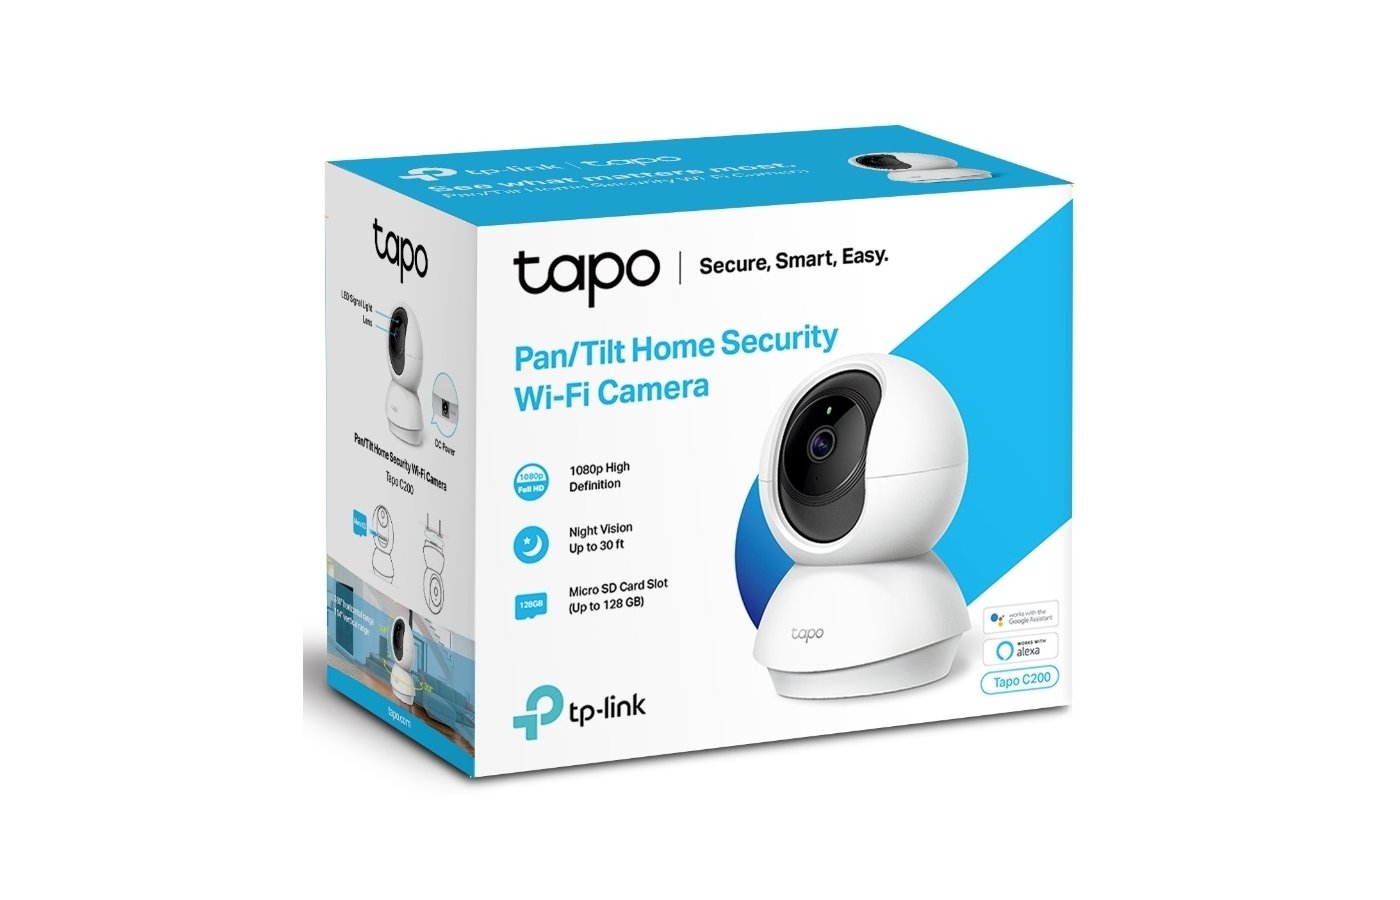 Ip tp link tapo c200. IP-камера TP-link tapo c310. TP-link / камера видеонаблюдения tapo c200. IP-камера TP-link tapo c200 2mp PTZ. 2way Audio. WIFI камера TP-link.